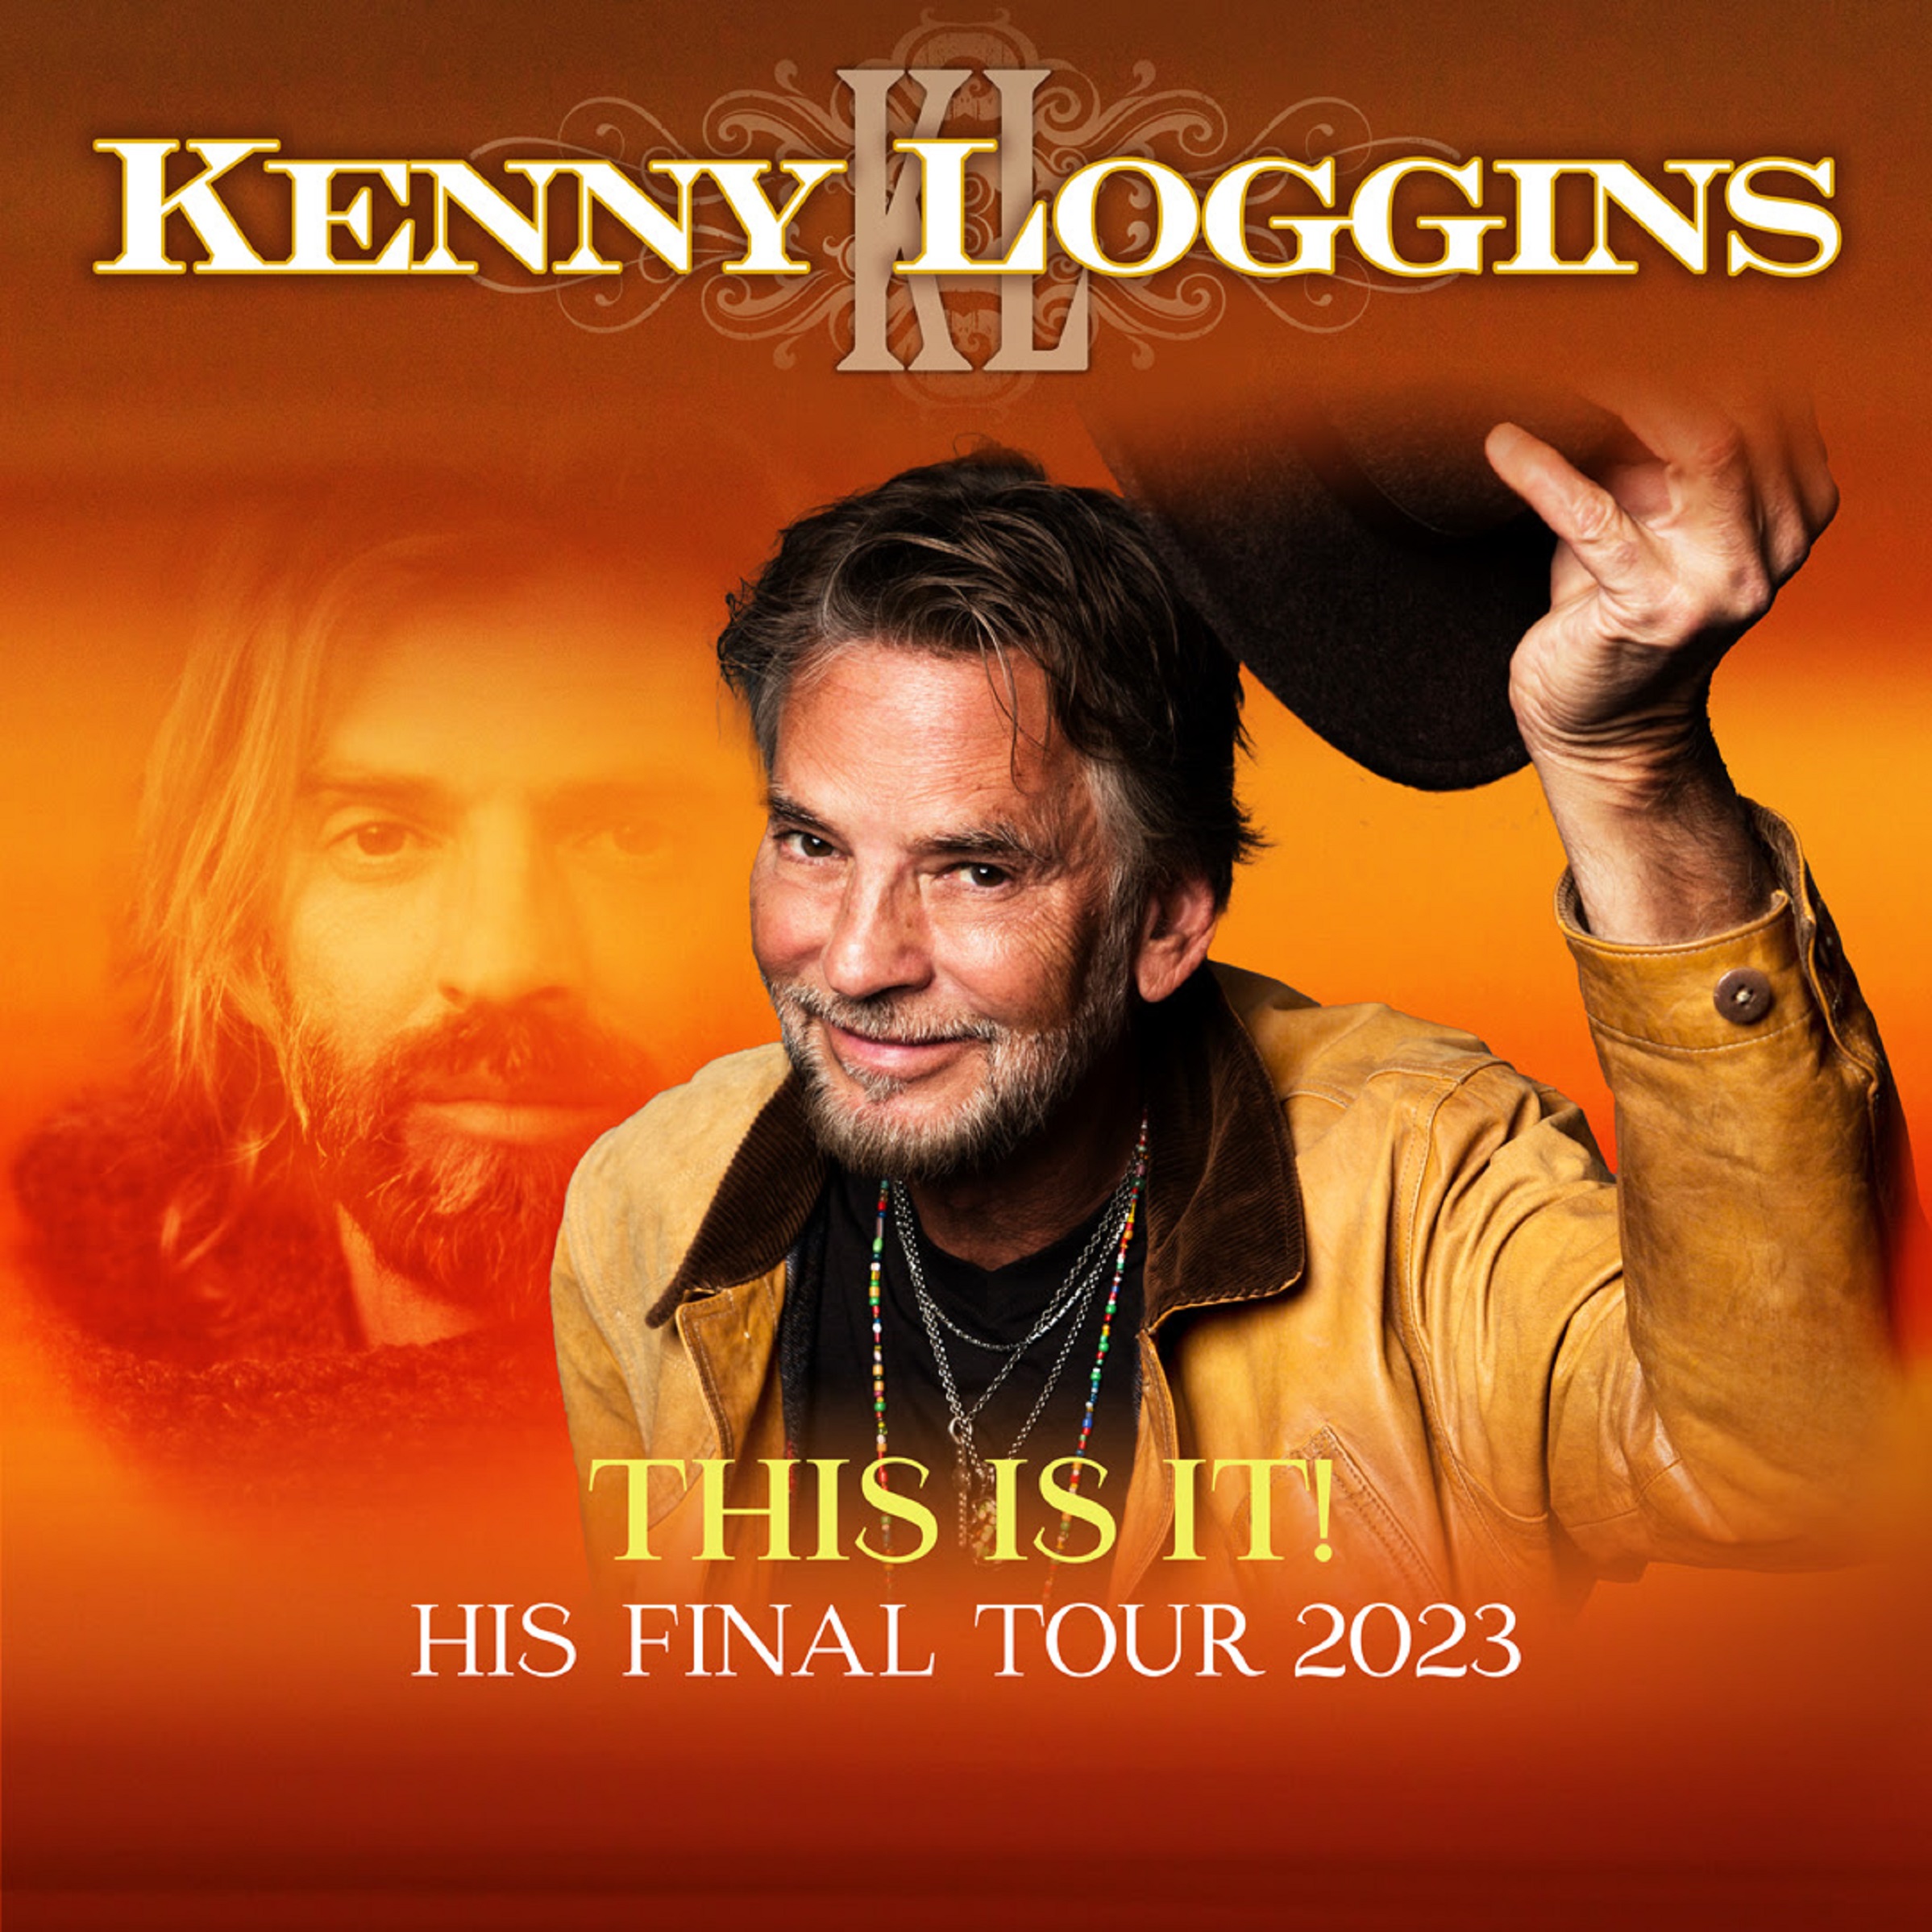 Kenny Loggins Announces New Dates for Final Tour, "This Is It"